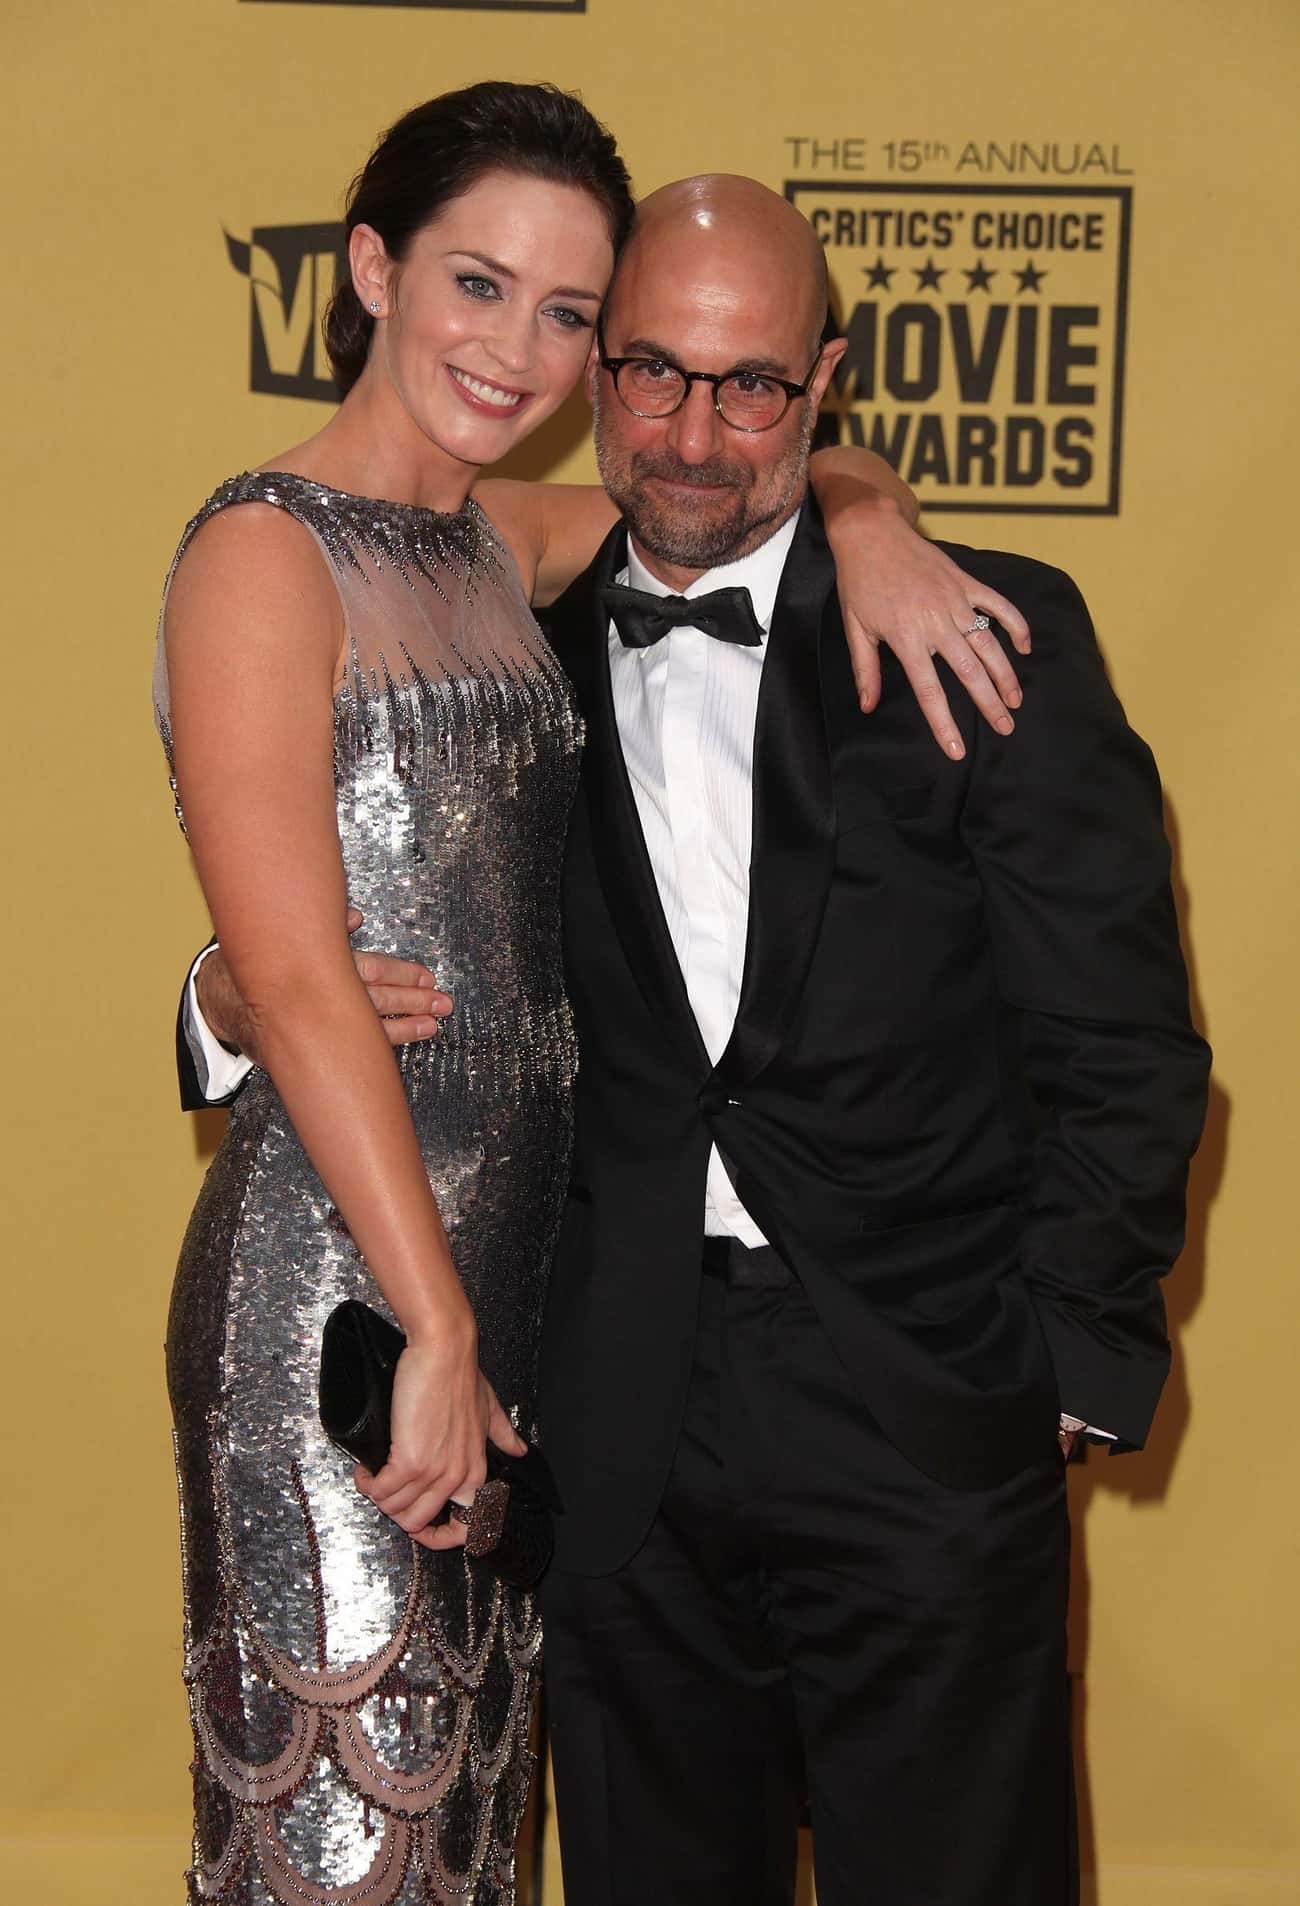 Stanley Tucci Is Her Brother-In-Law